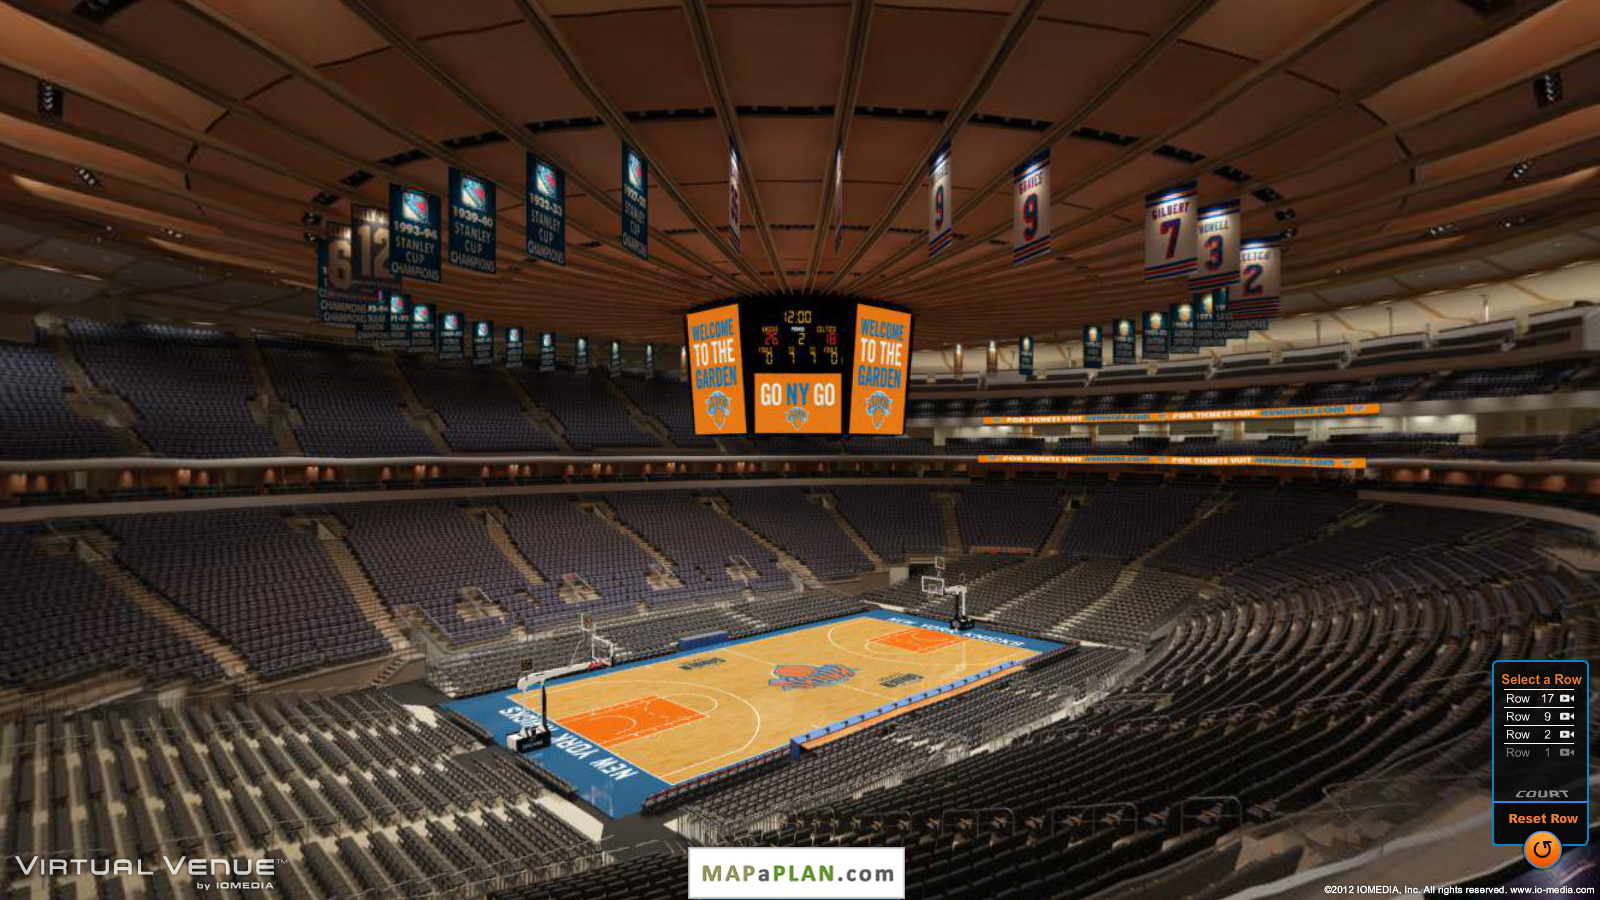 Madison Square Garden seating chart View from section 208